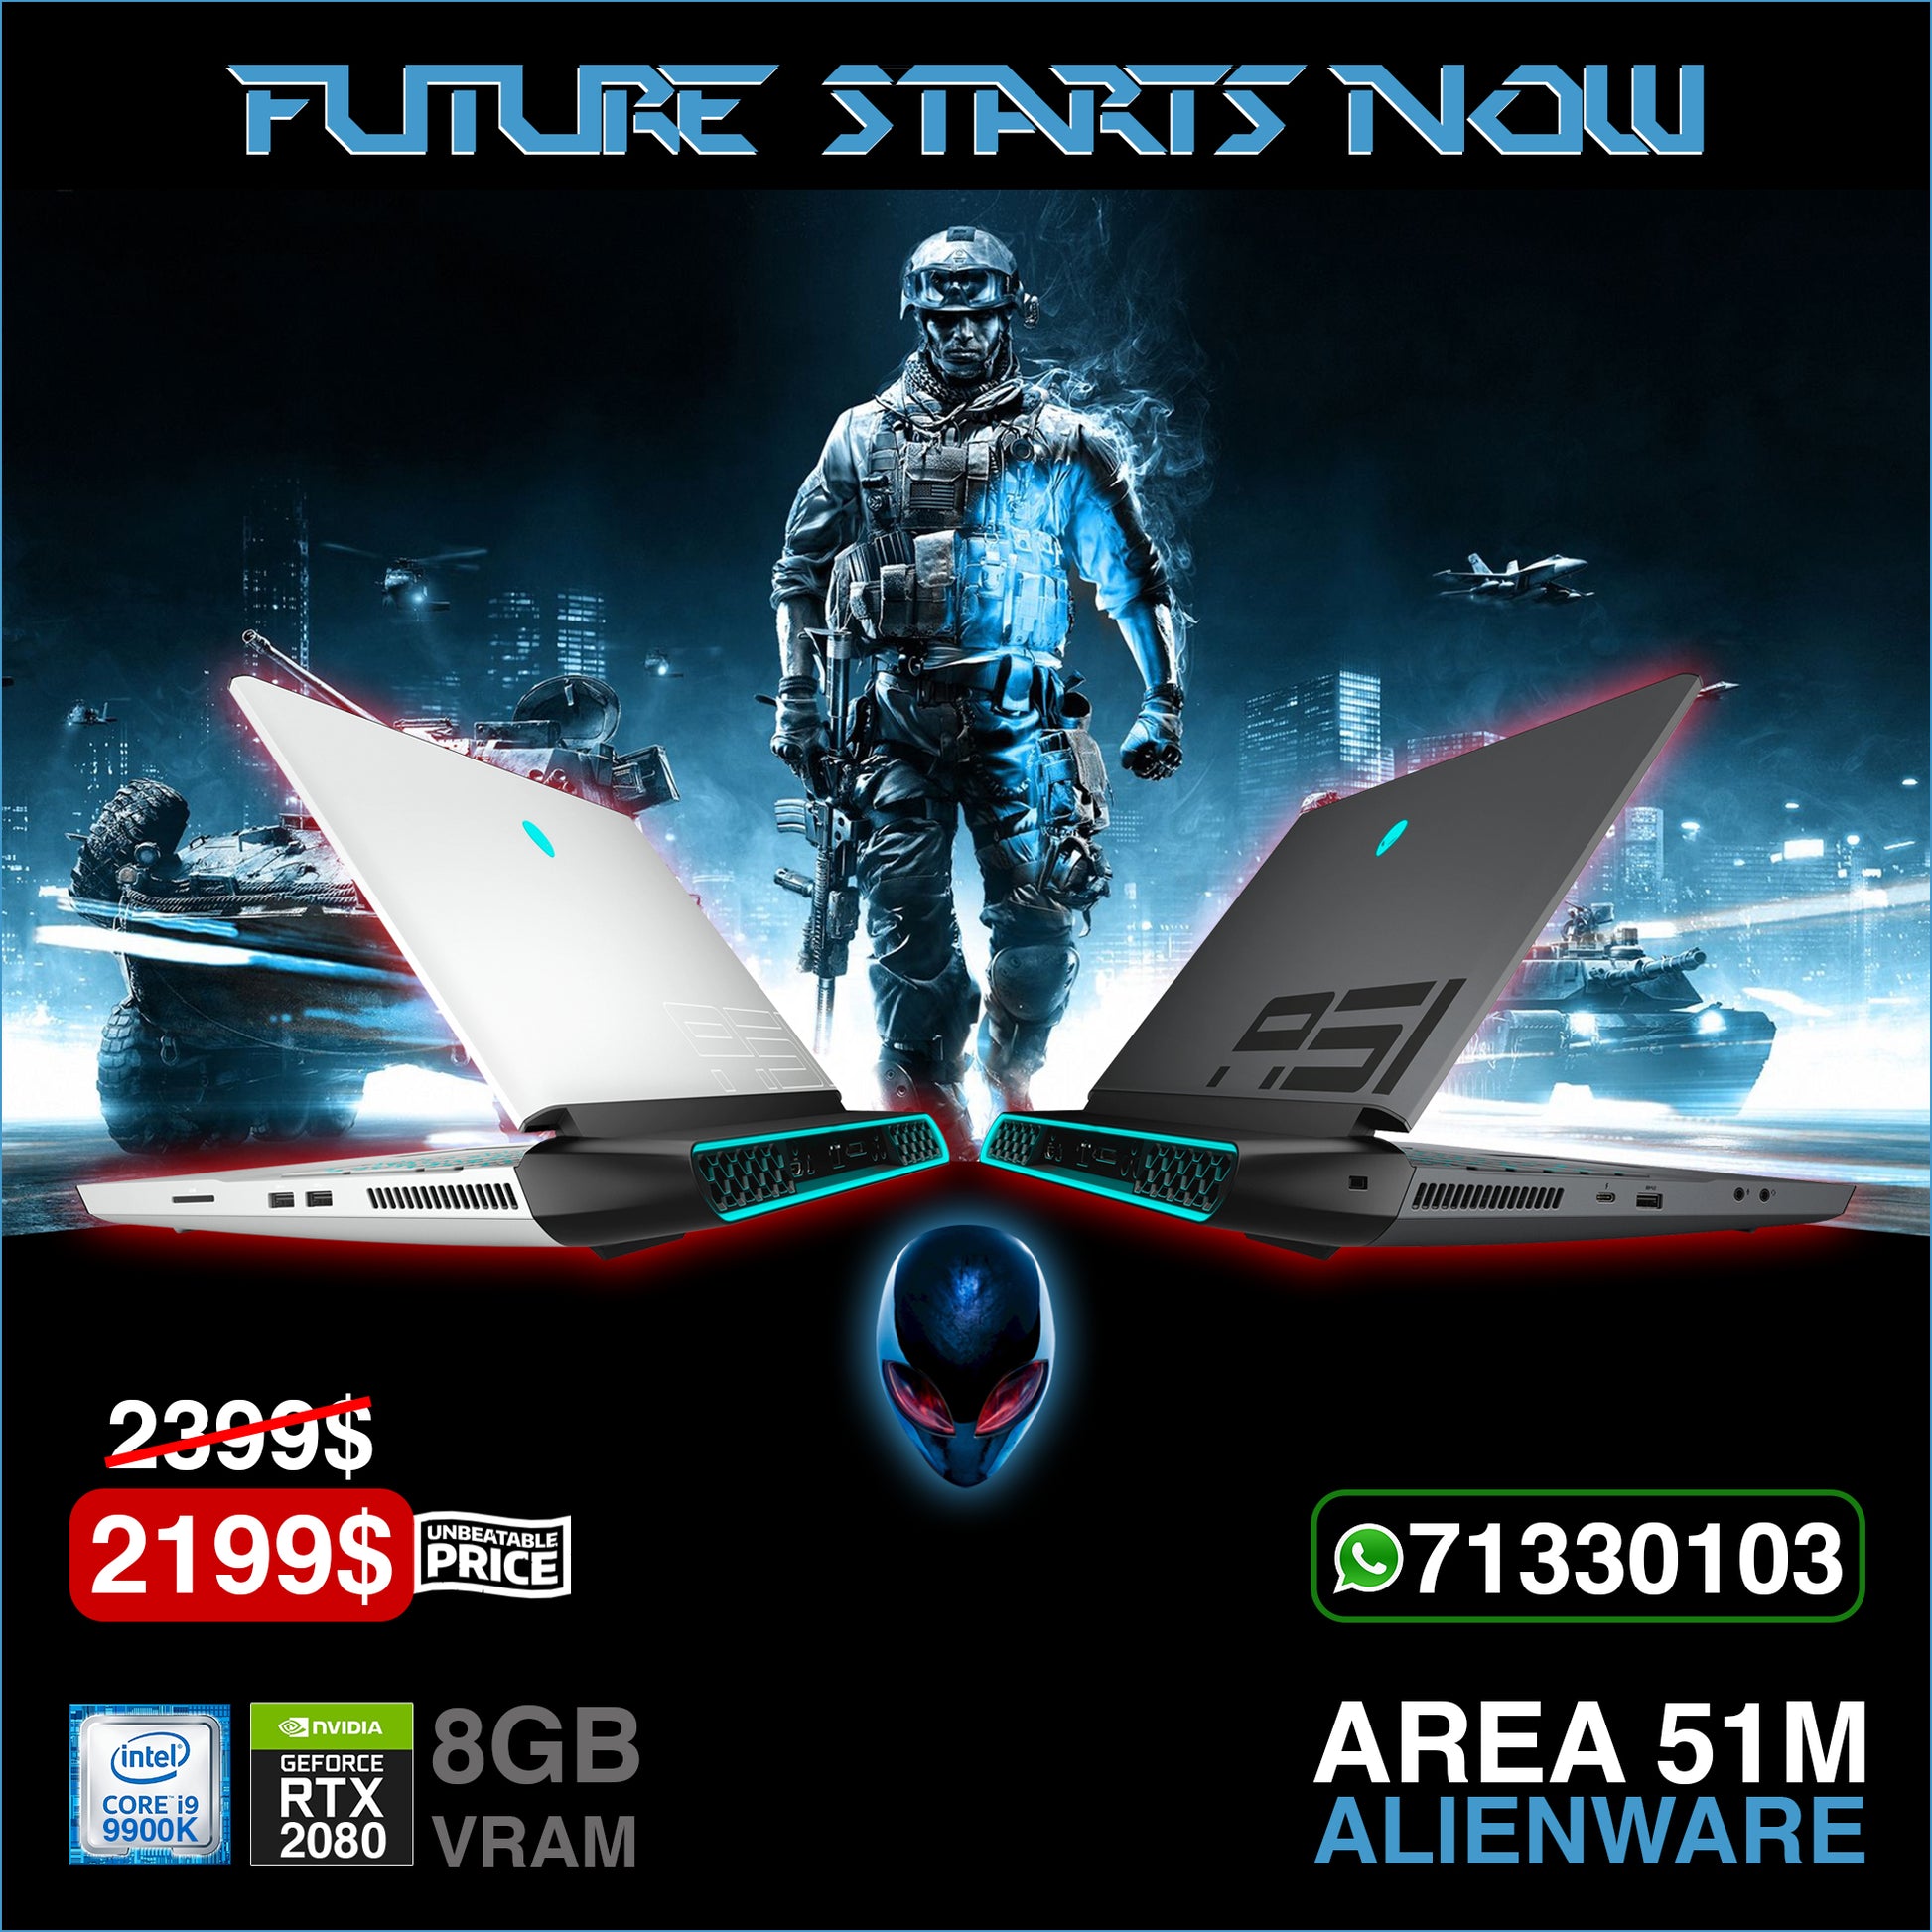 Alienware Area51m i9 9900k Gaming Laptop Offers (New Open Box) Gaming laptop, Graphic Design laptop, best laptop for gaming, Best laptop for graphic design, computer for sale Lebanon, laptop for video editing in Lebanon, laptop for sale Lebanon, Best graphic design laptop,	Best video editing laptop, Best programming laptop, laptop for sale in Lebanon, laptops for sale in Lebanon, laptop for sale in Lebanon, buy computer Lebanon, buy laptop Lebanon.